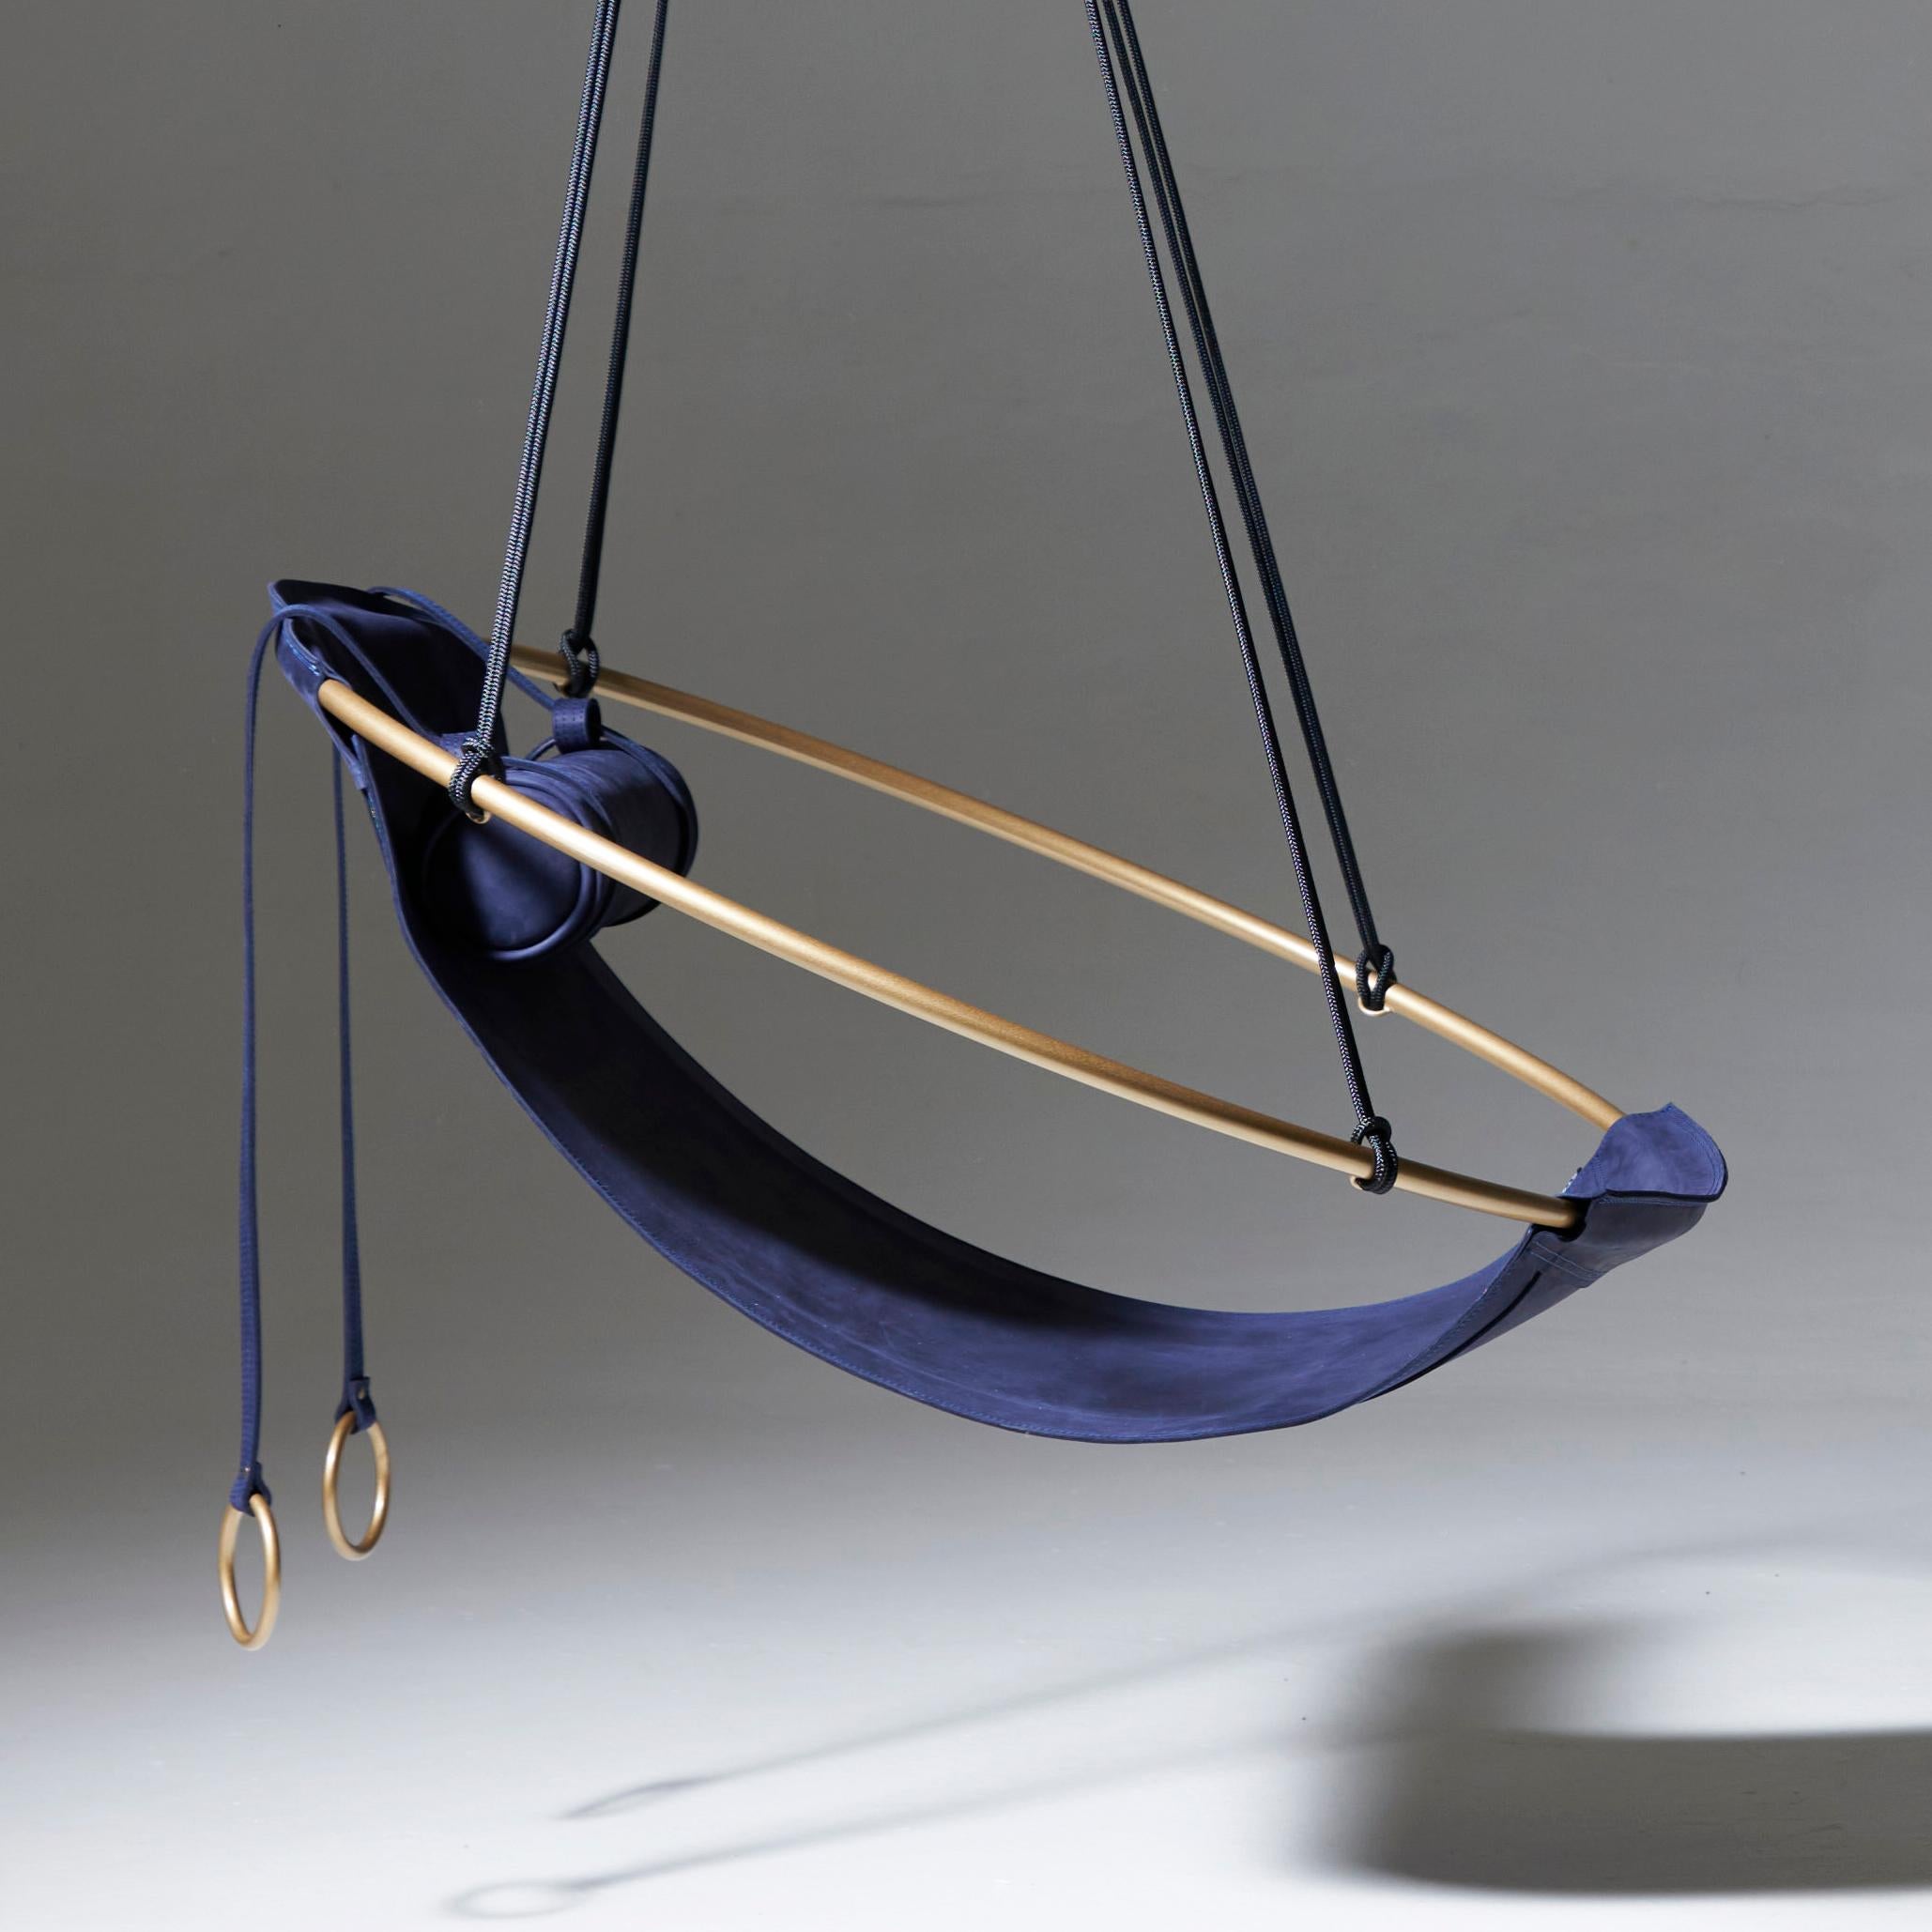 Powder-Coated Minimal Modern 1 of a Kind Blue and Gold Sling Hanging Chair For Sale